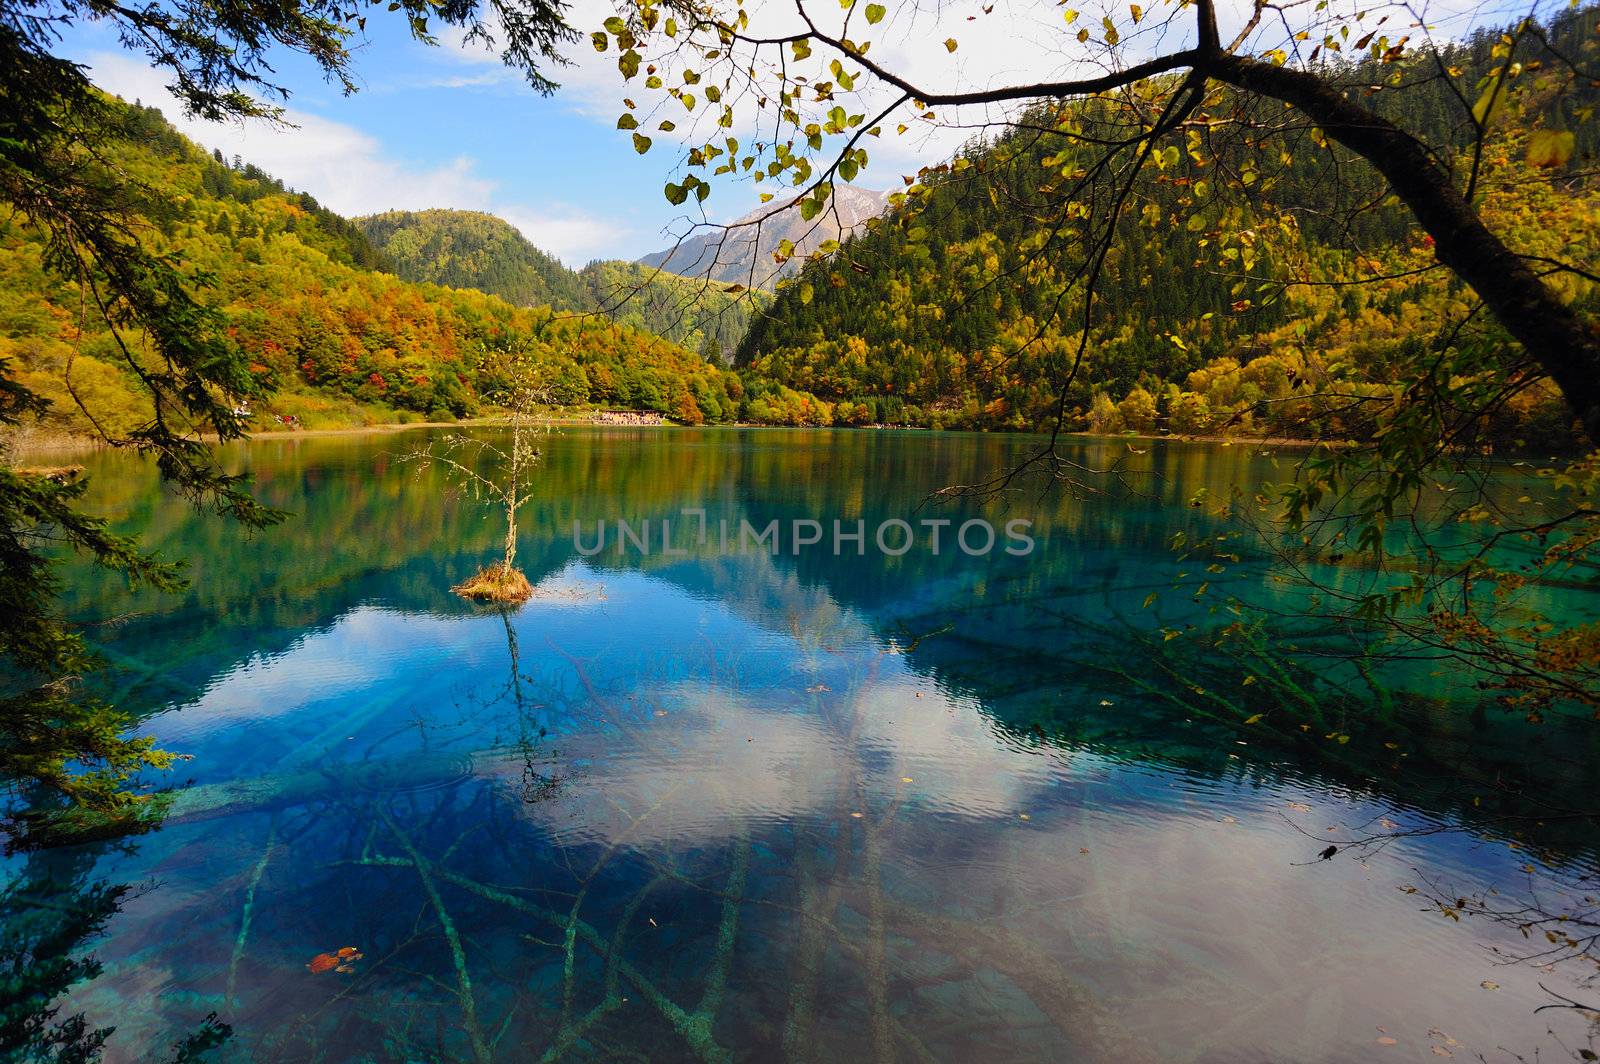 Forest and Lake in Jiuzhaigou, Sichuan province of China